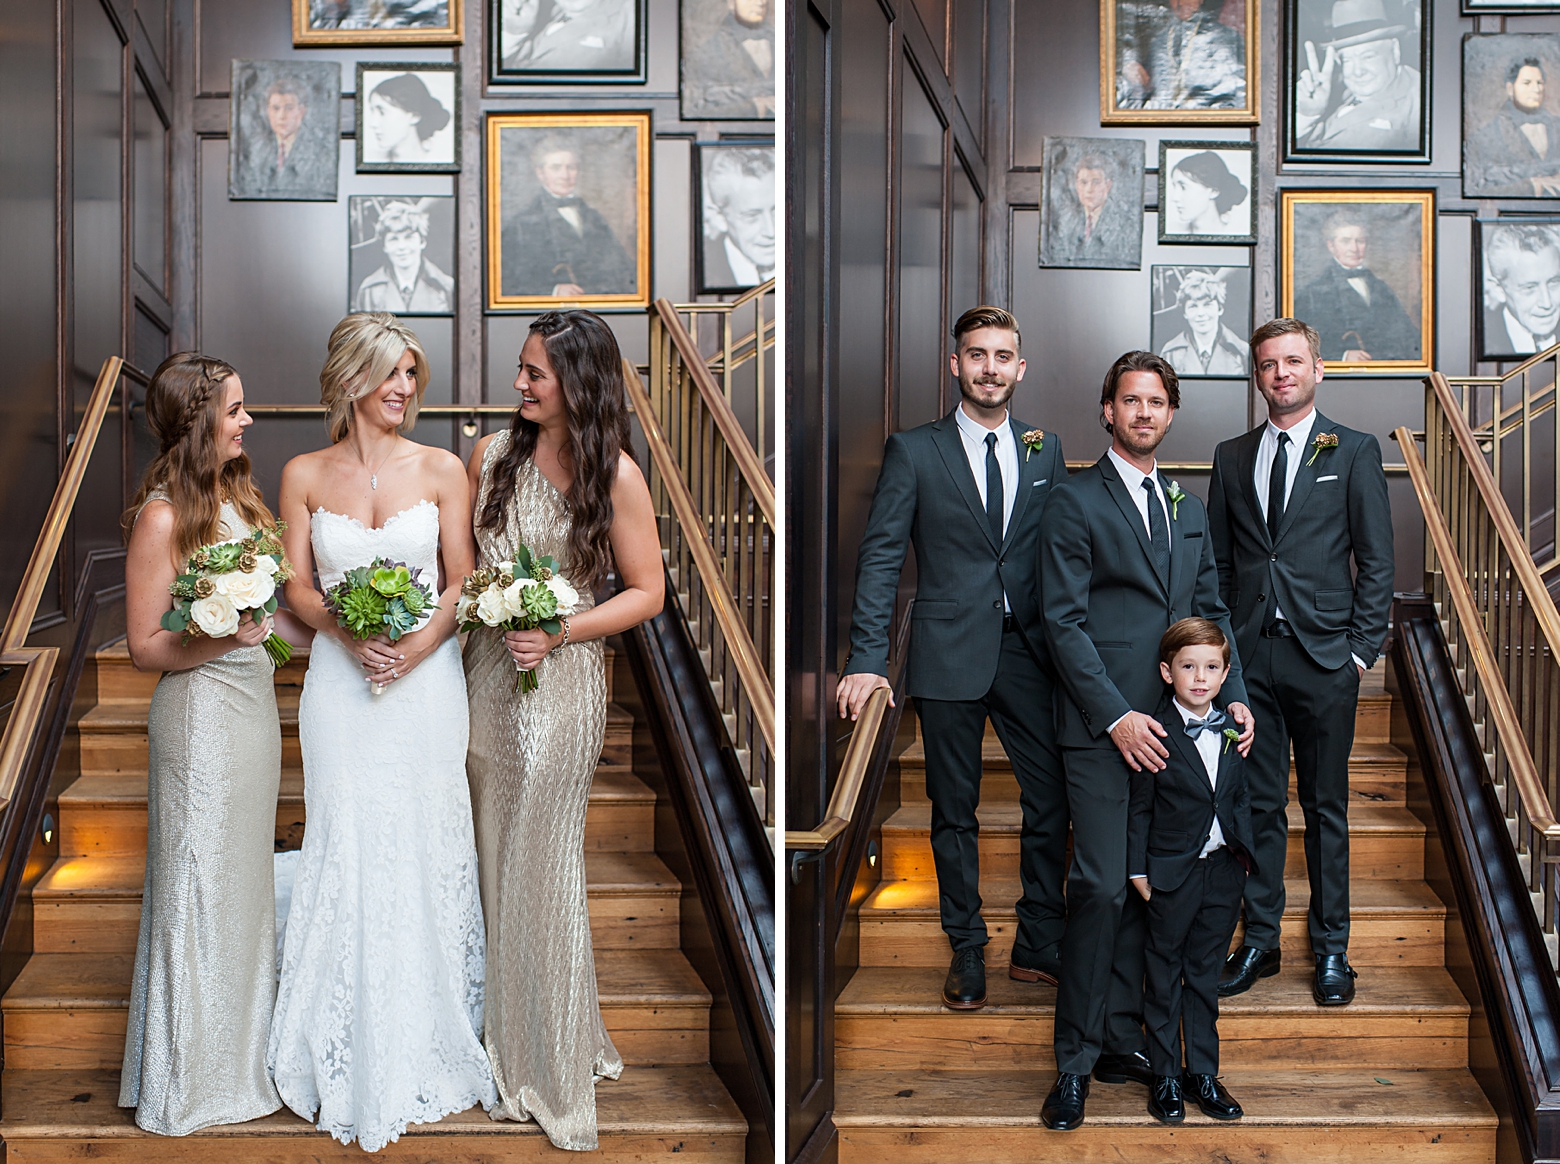 Bride and her Bridesmaids and Groom with his Groomsmen on the steps in the atrium in Tampa, FL